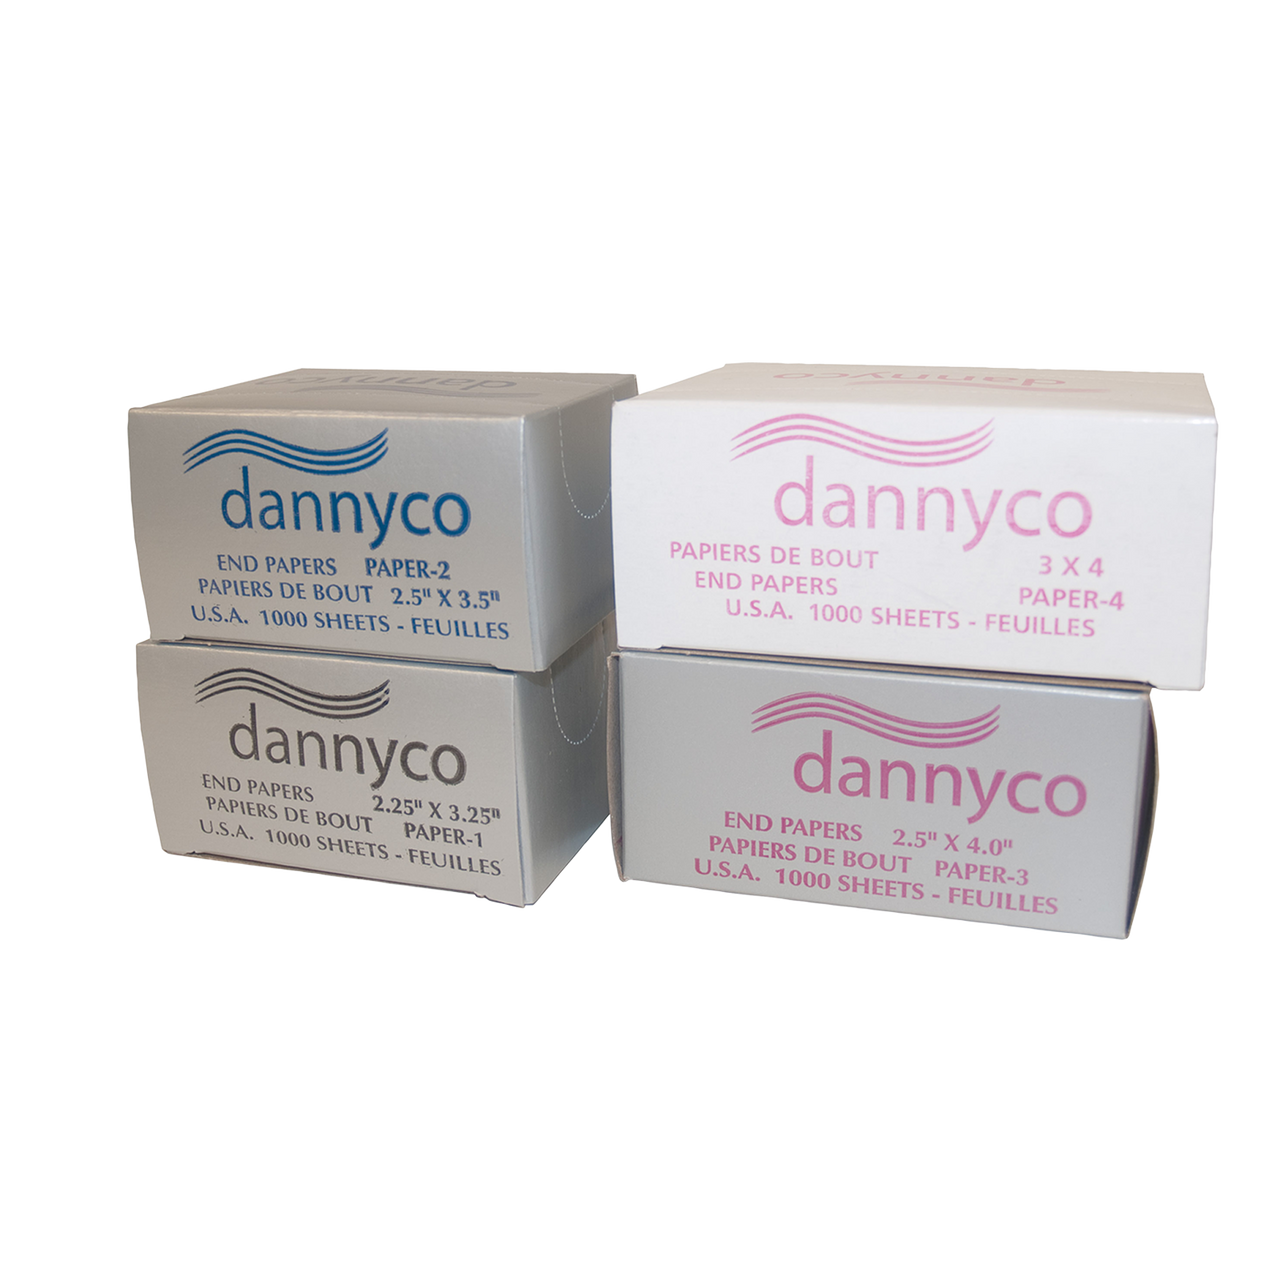 Dannyco Sundries End Wraps 2 1/2" x 3 1/2" (1000 sheets) 1 Box